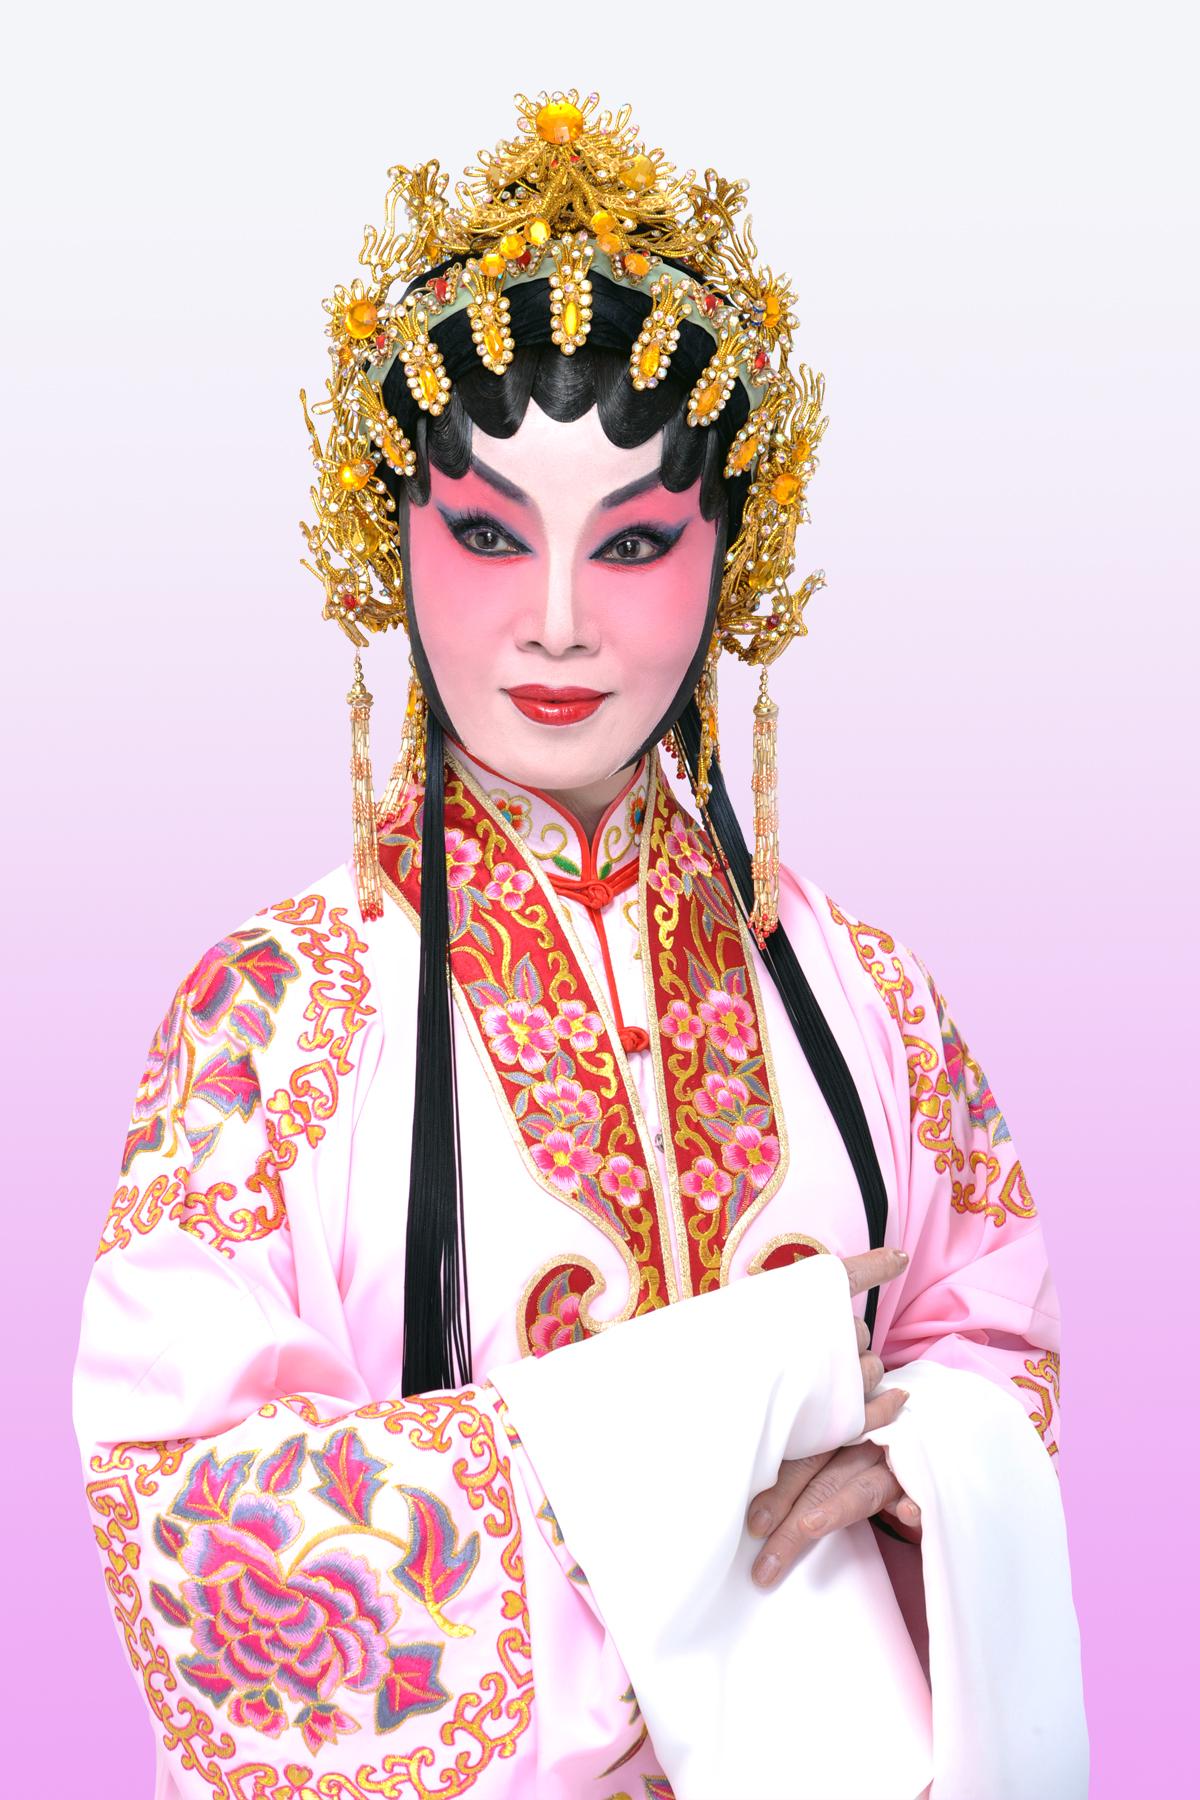 The Chinese Opera Festival 2023, presented by the Leisure and Cultural Services Department, will bring together an array of well-known local Cantonese opera stars to perform in "The Art of Wusheng Roles in Cantonese Opera". Photo shows renowned Cantonese opera artist Wan Fai-yin.